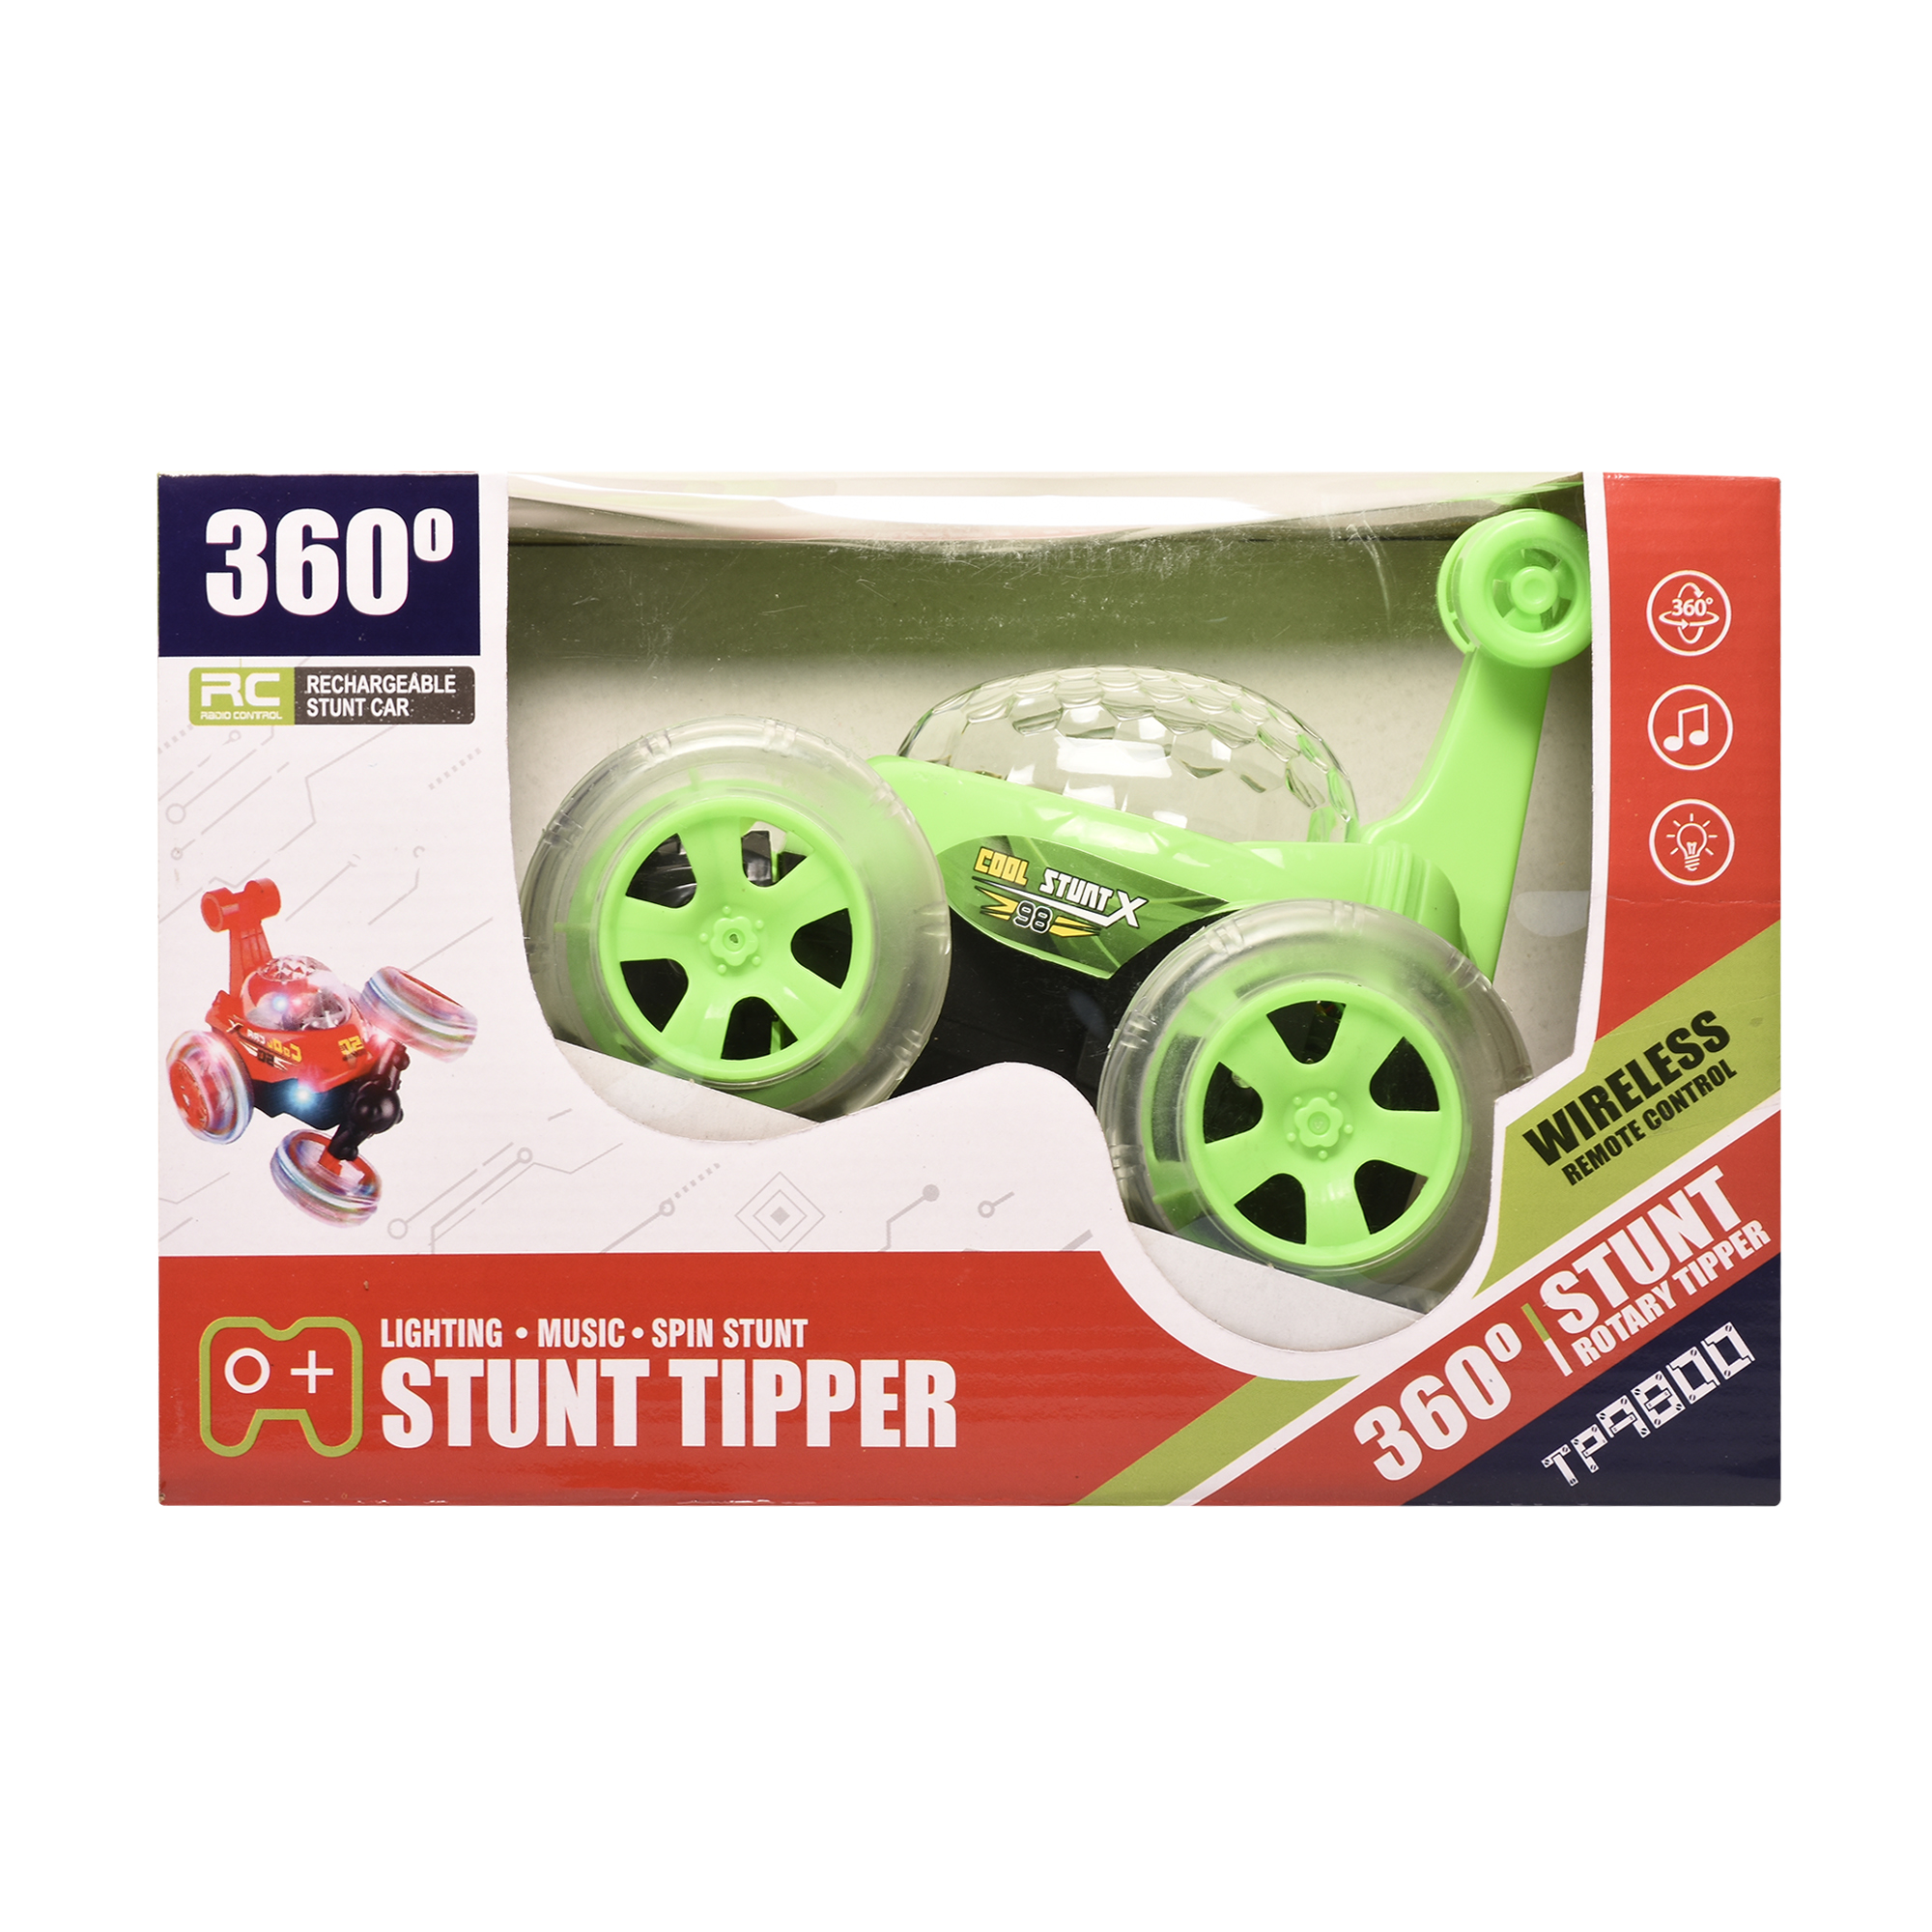 Rechargeable Remote Control Stunt Tipper RC Car Acrobatic 360 Degree Spiral Spin Twisting Stunt Car with Colorful Lights & Music Toys for Kids 5+Years (Green)